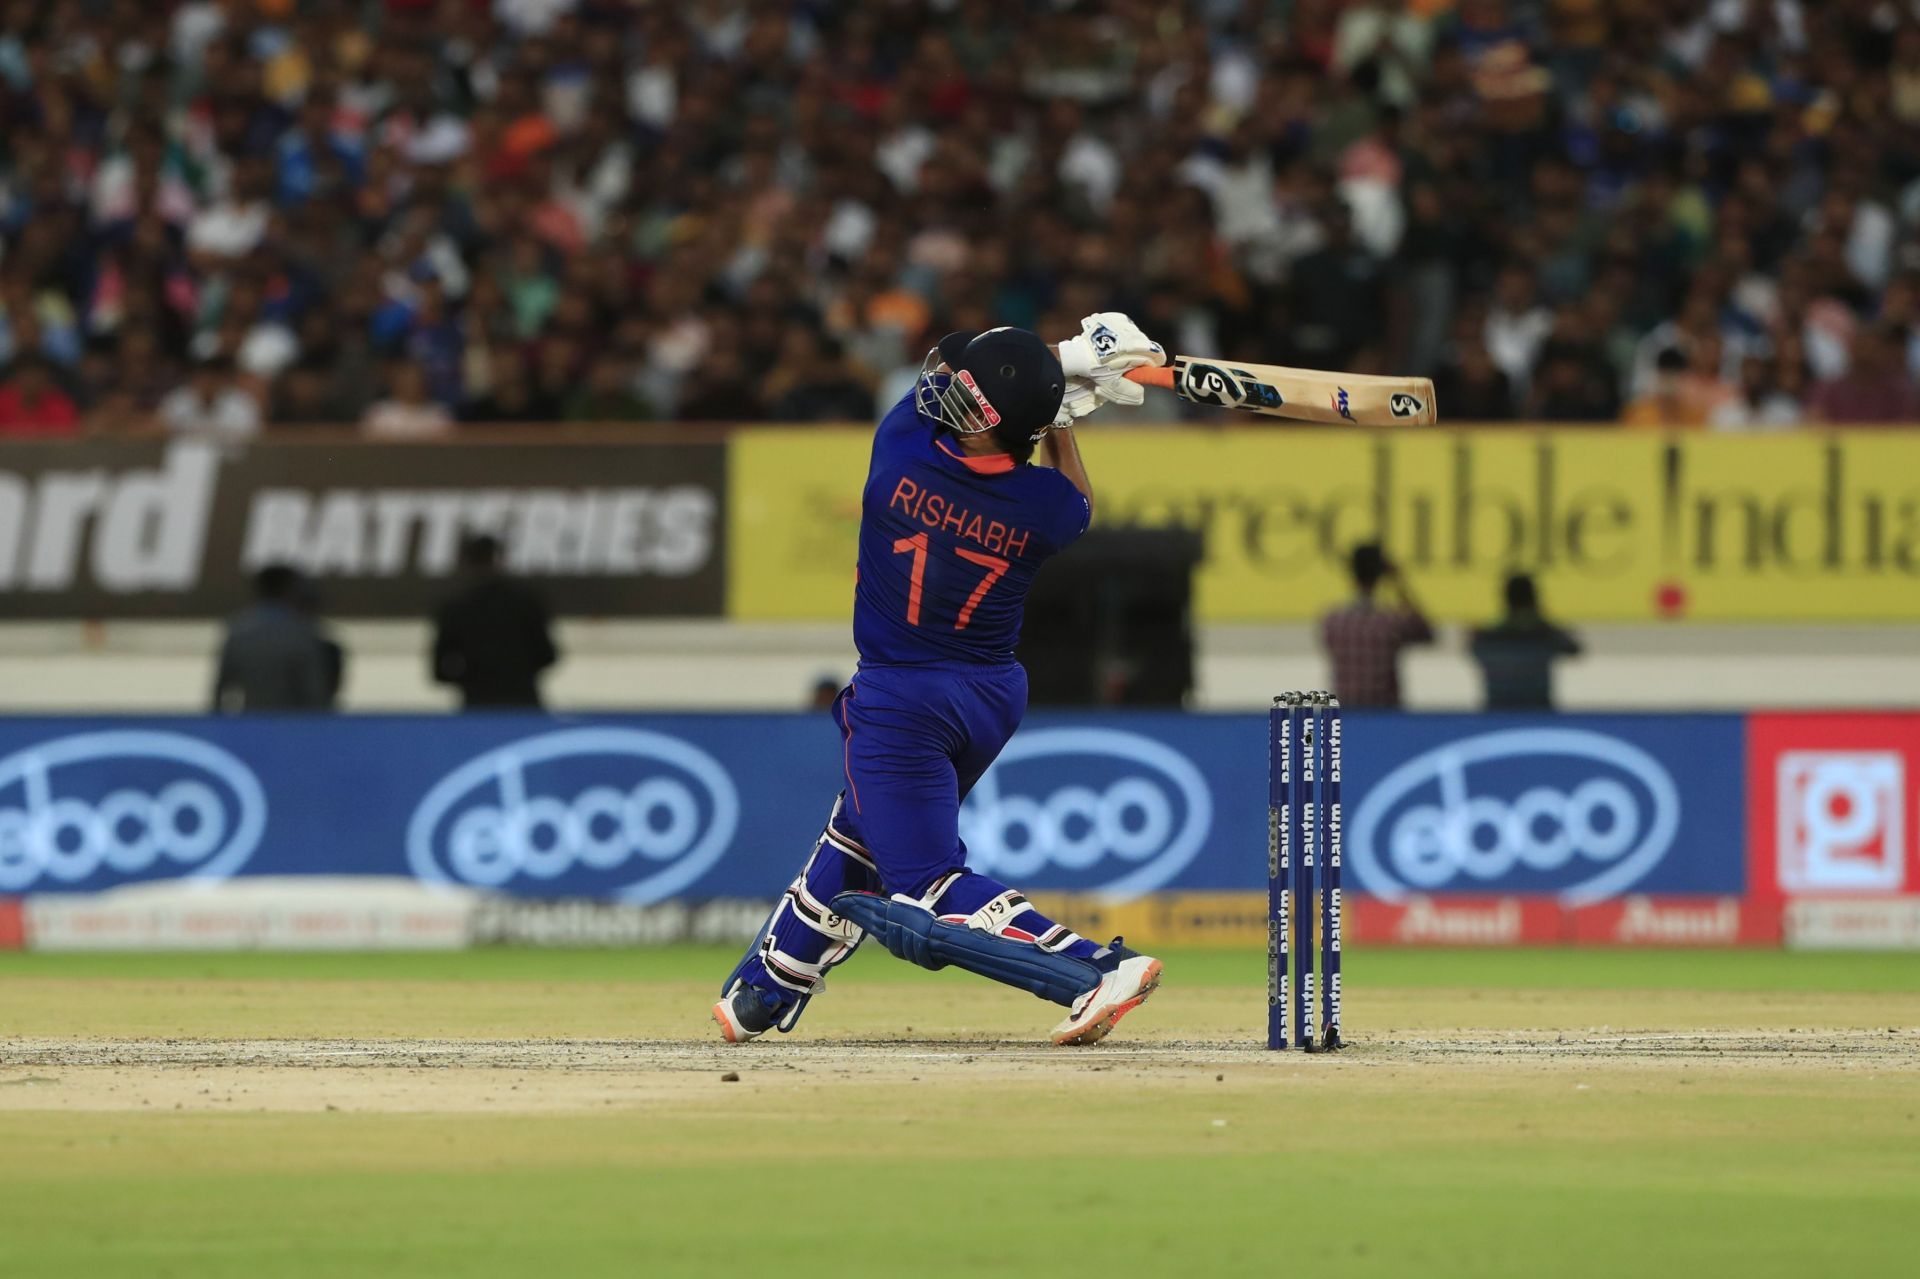 Rishabh Pant has been found wanting against deliveries wide outside the off-stump [P/C: BCCI]